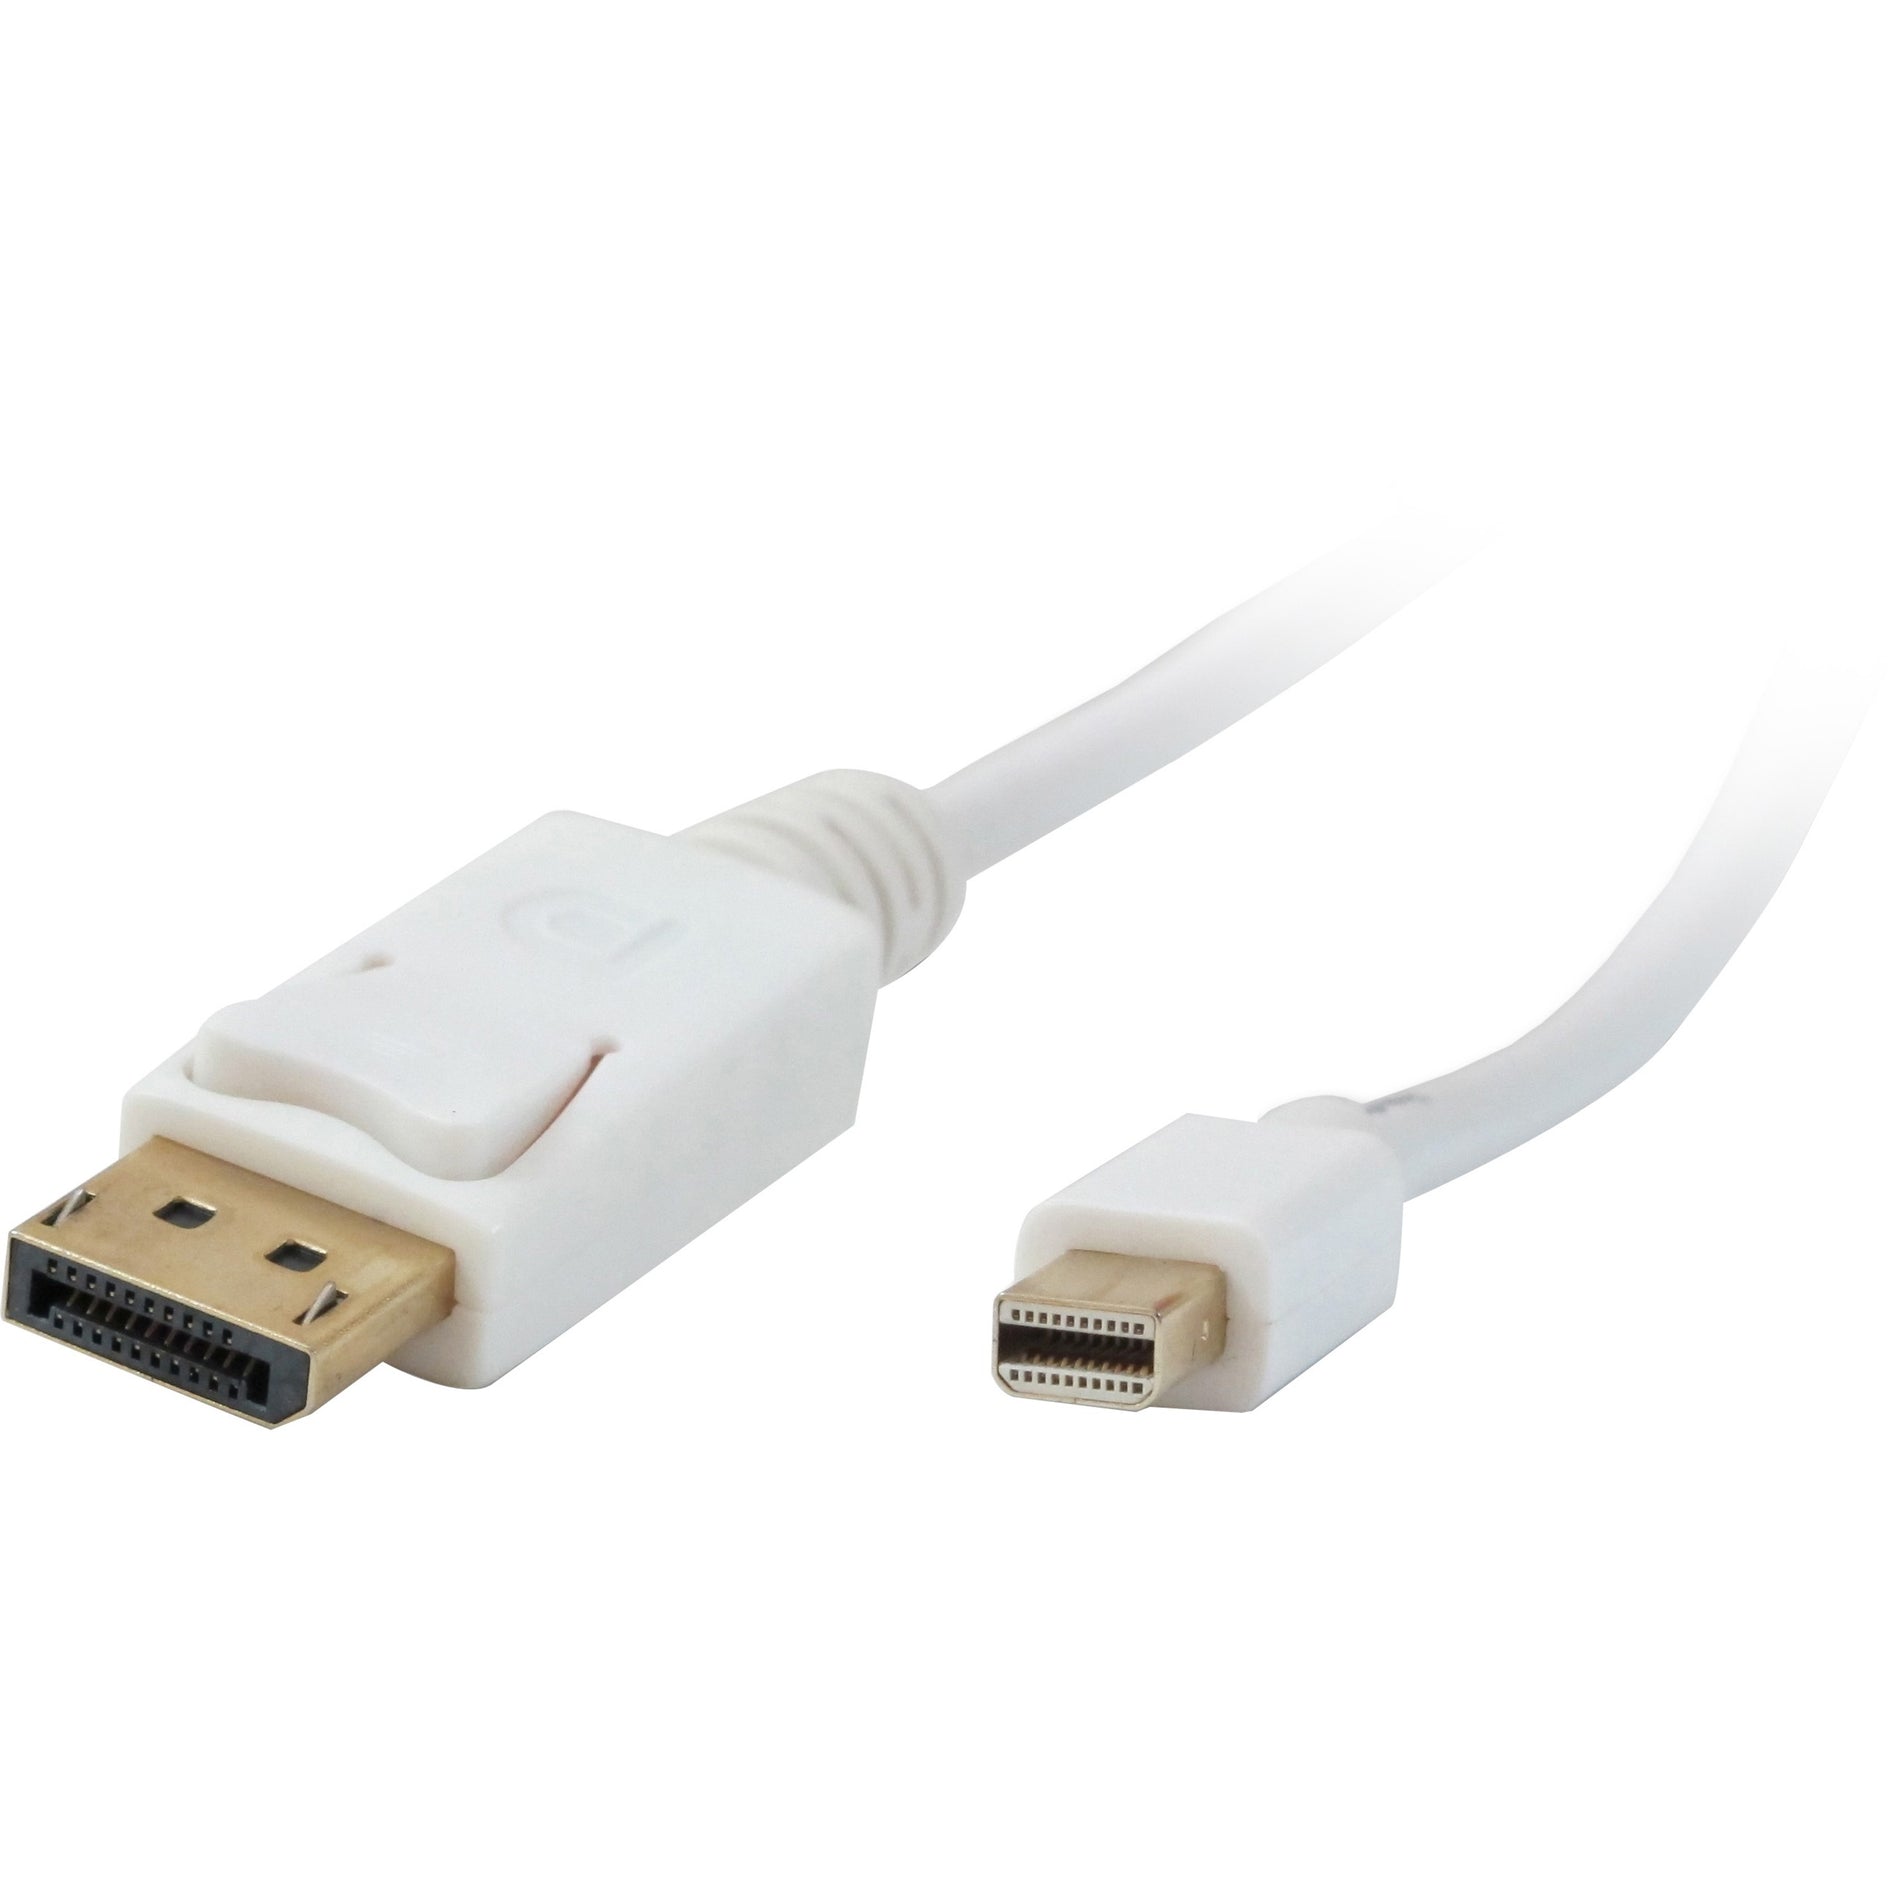 Comprehensive MDP-DISP-15ST Mini DisplayPort Male to DisplayPort Male Cable 15ft, High-Speed Data Transfer for HDTVs, Monitors, and PCs